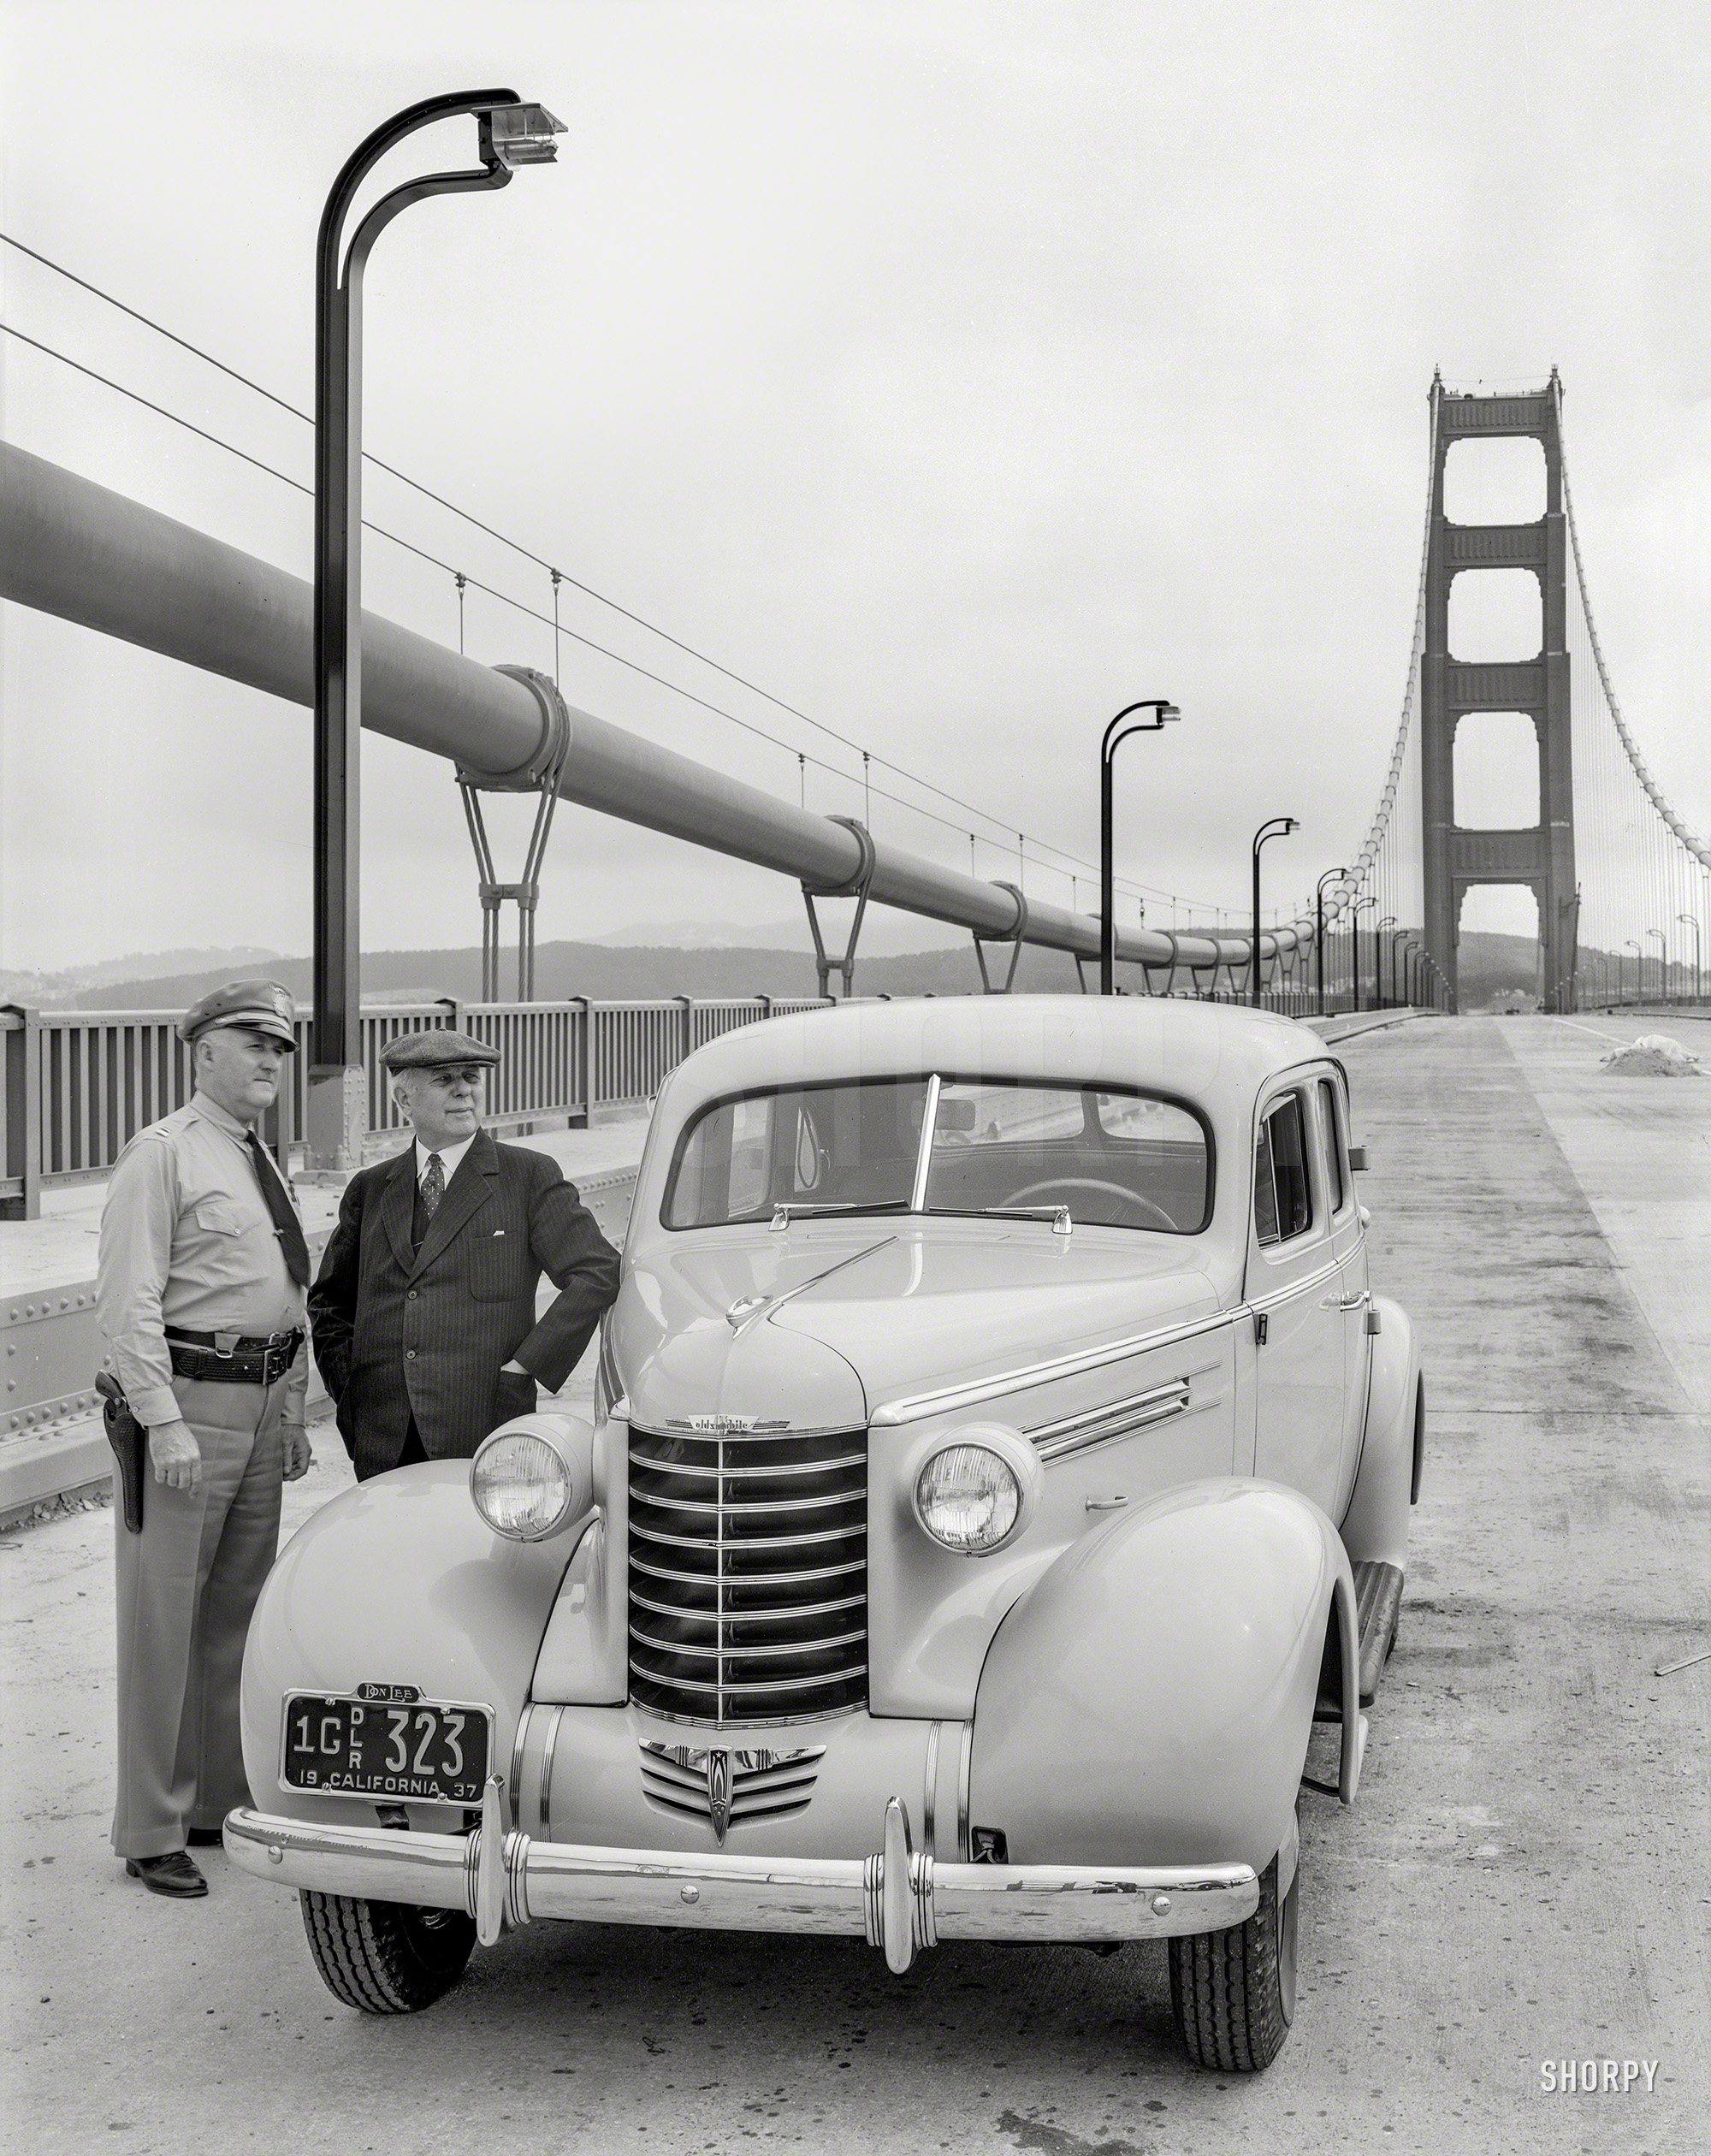 San Francisco, 1937. "Don Lee Oldsmobile on Golden Gate Bridge with police officer." Whose cruiser we can see reflected in the bumper. 8x10 acetate negative, originally from the Wyland Stanley collection. View full size.